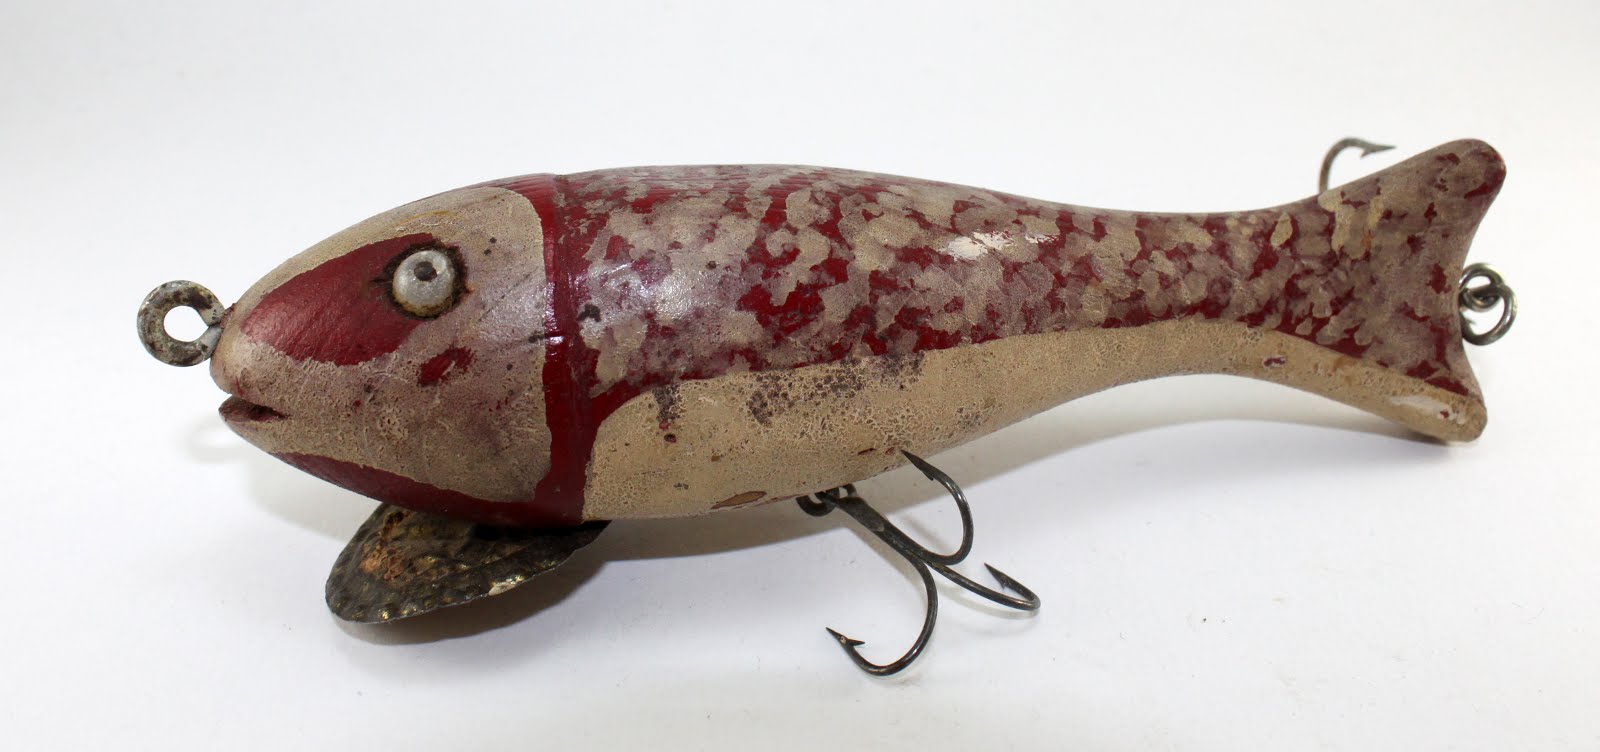 Chance's Folk Art Fishing Lure Research Blog: Intriguing Red and White  musky Minnows